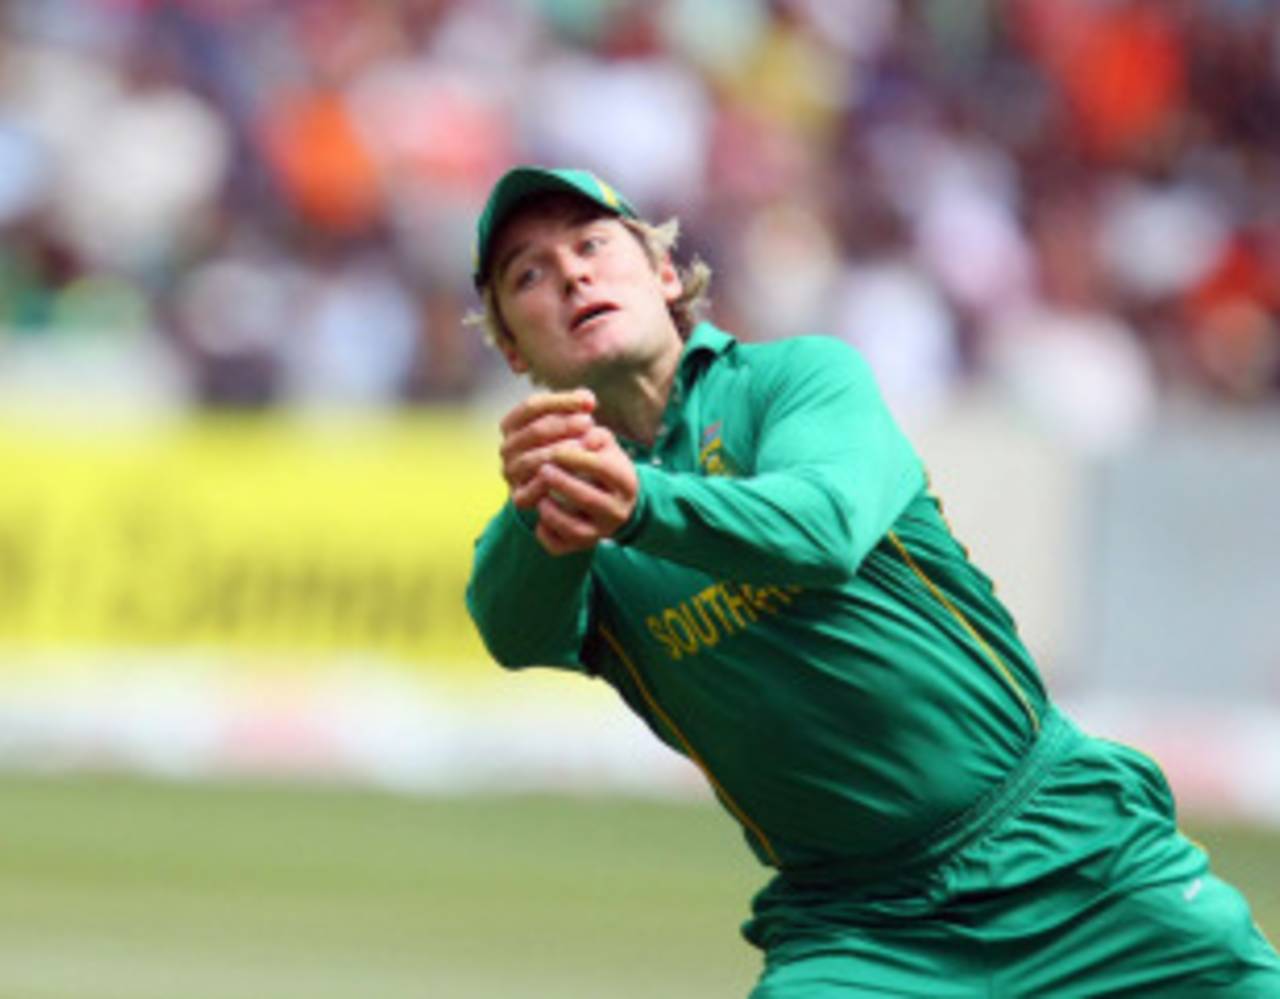 Morne van Wyk takes a diving catch to dismiss M Vijay, South Africa v India, only Twenty20, Durban